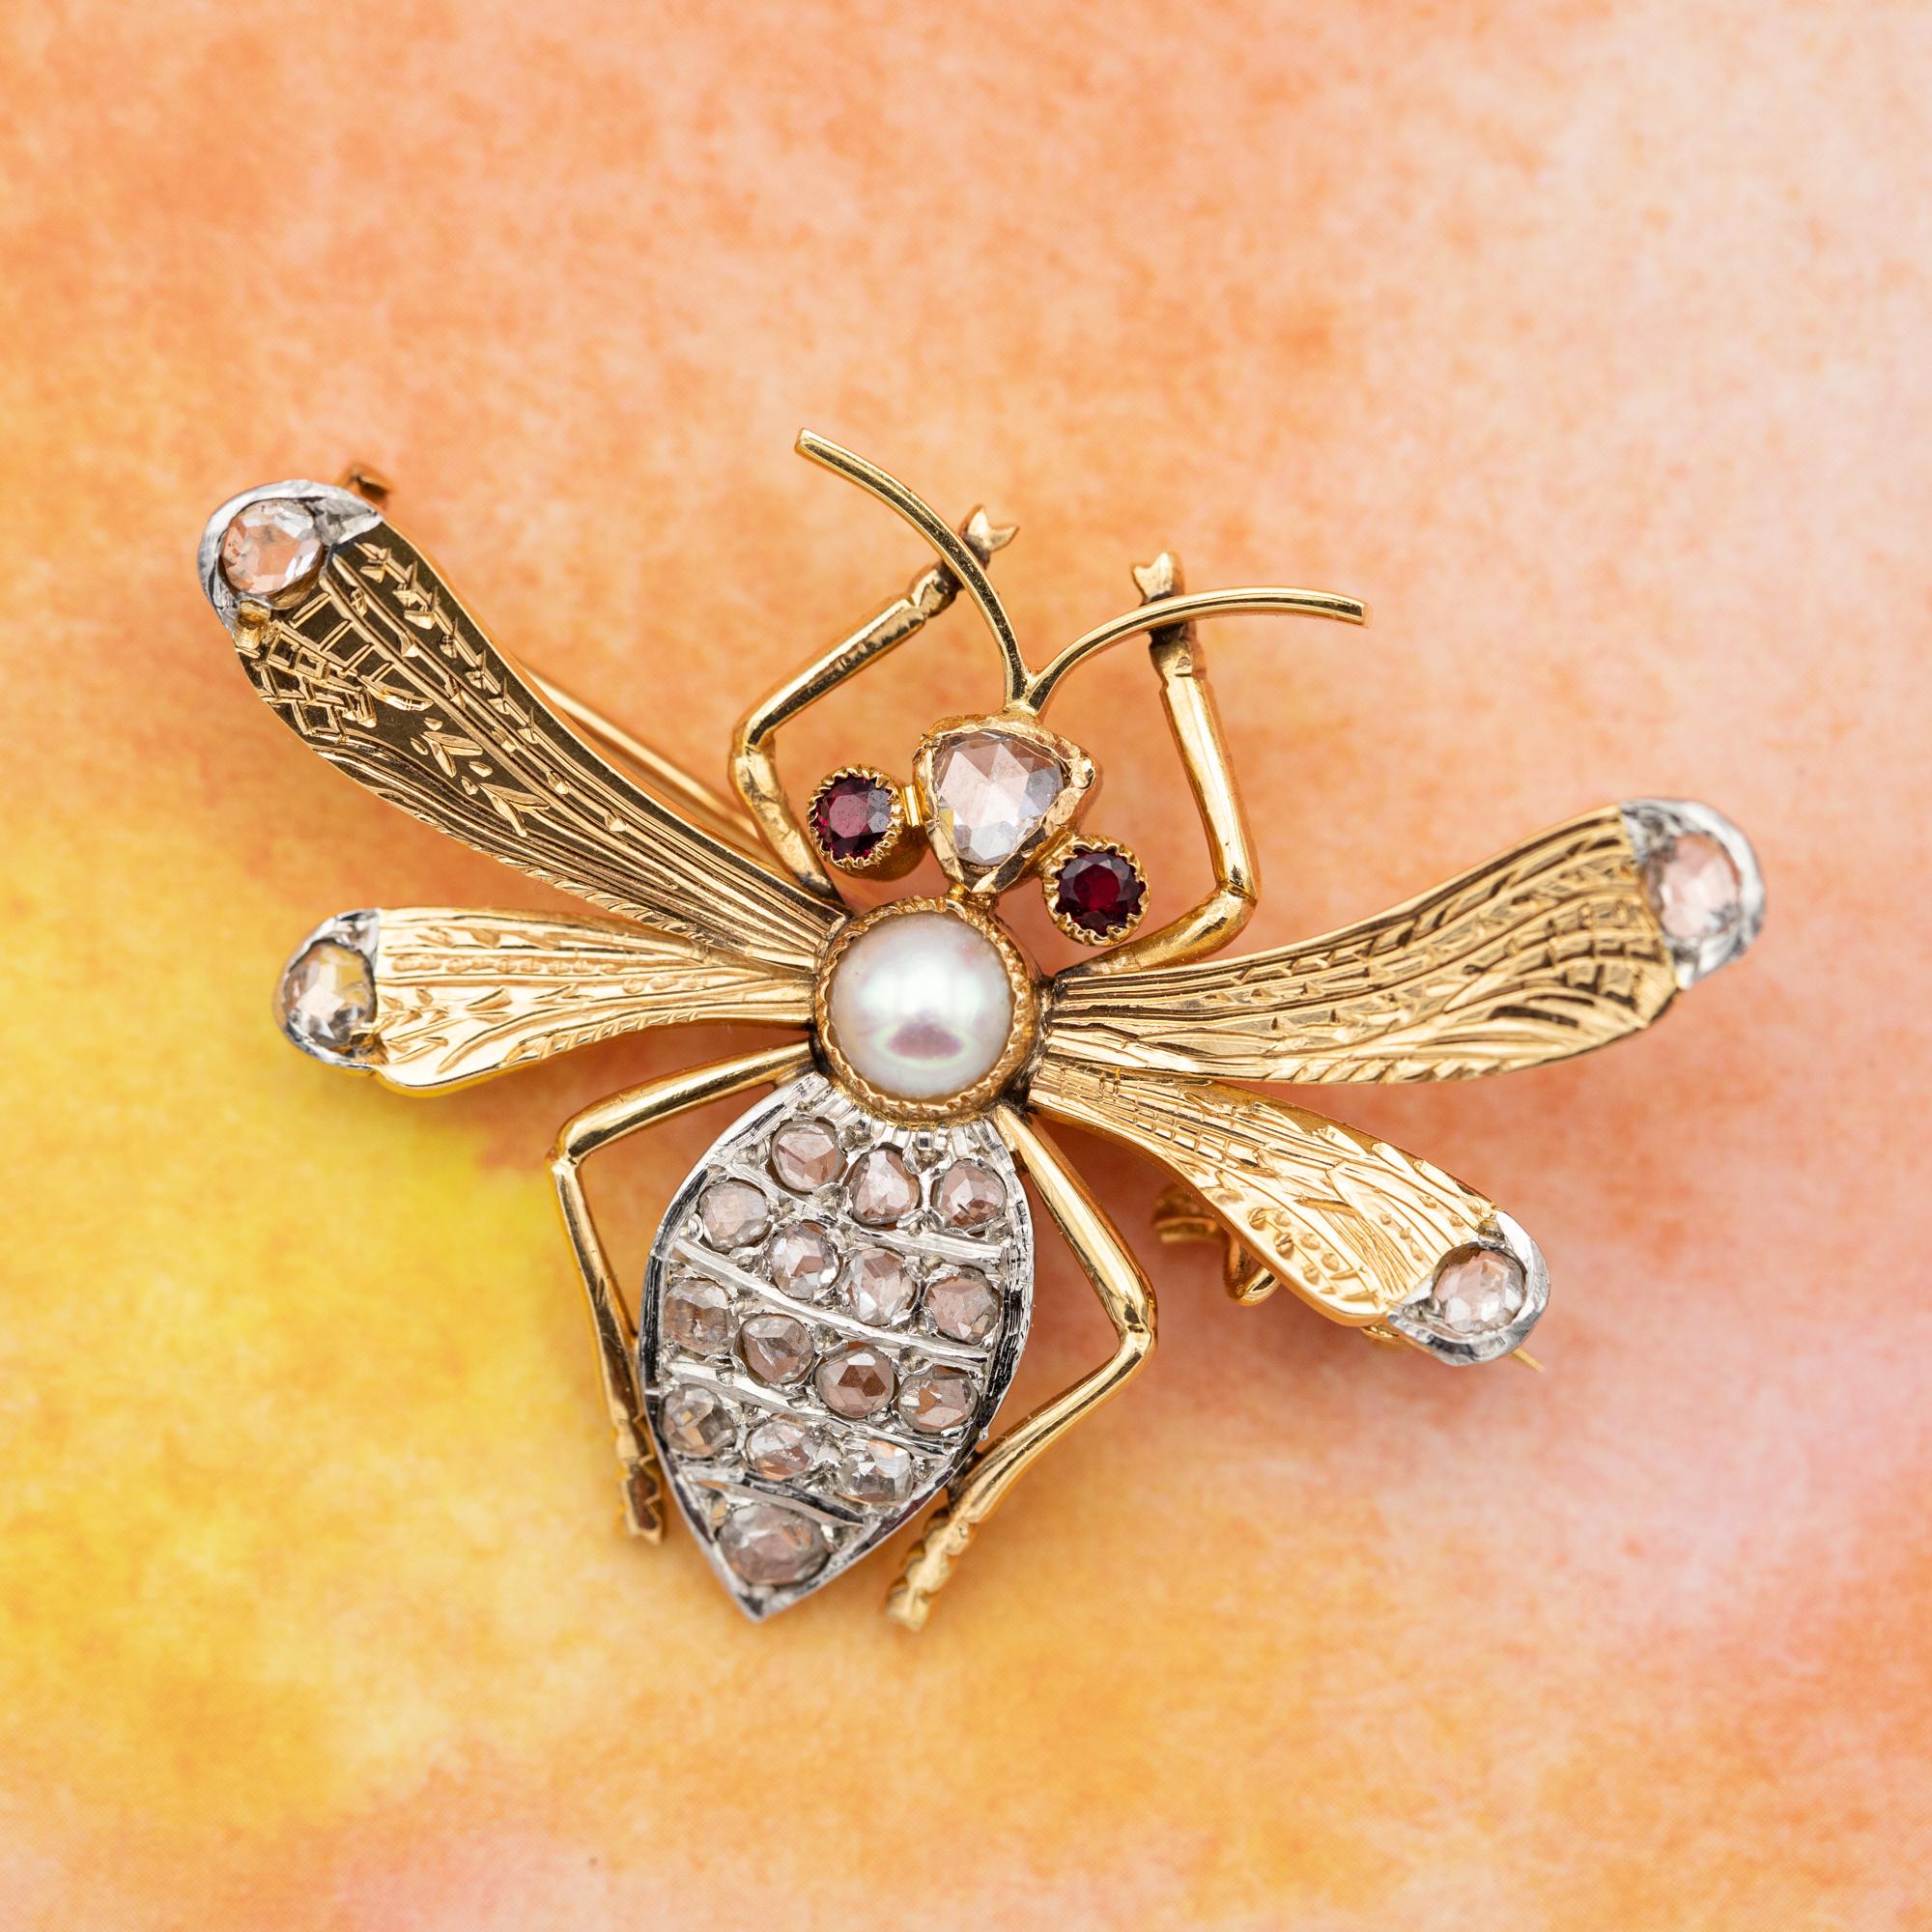 Rare Victorian brooch - 18 K Yellow gold Queen Bee set with rose cut diamond For Sale 3